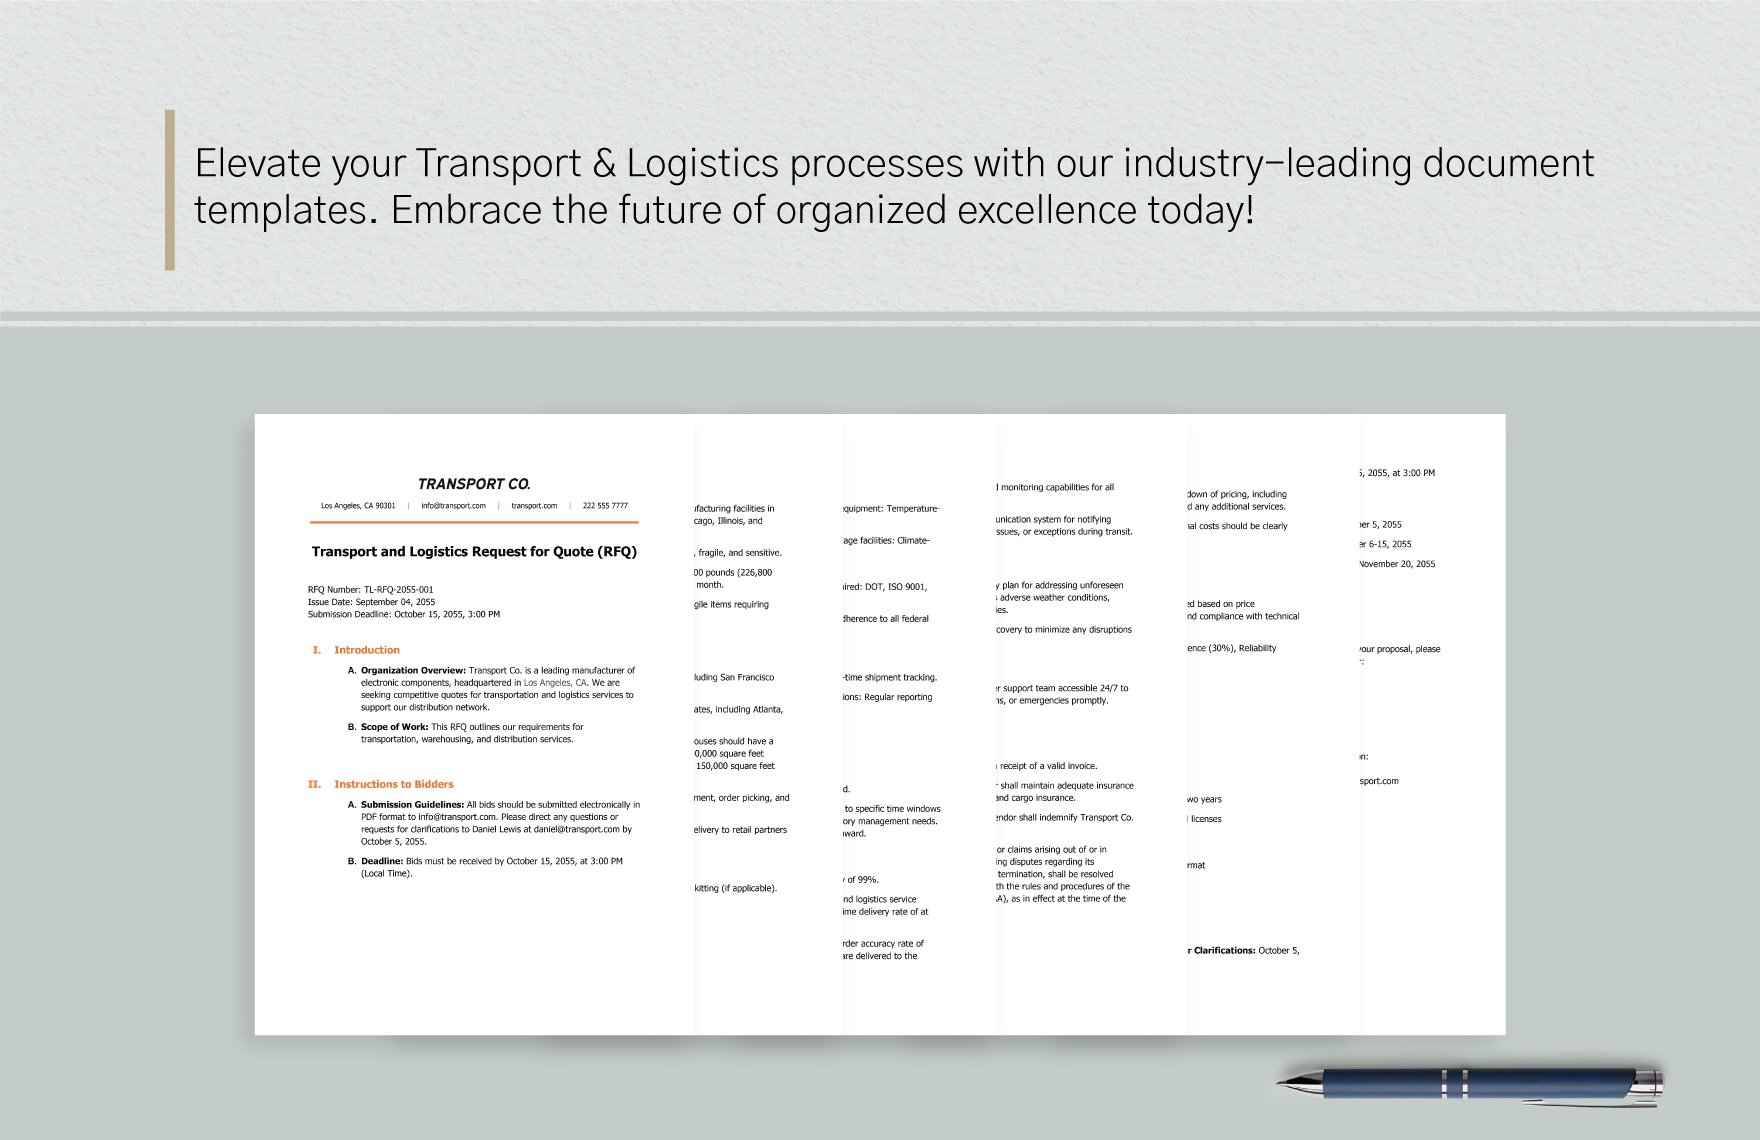 Transport and Logistics Request for Quote (RFQ) Template